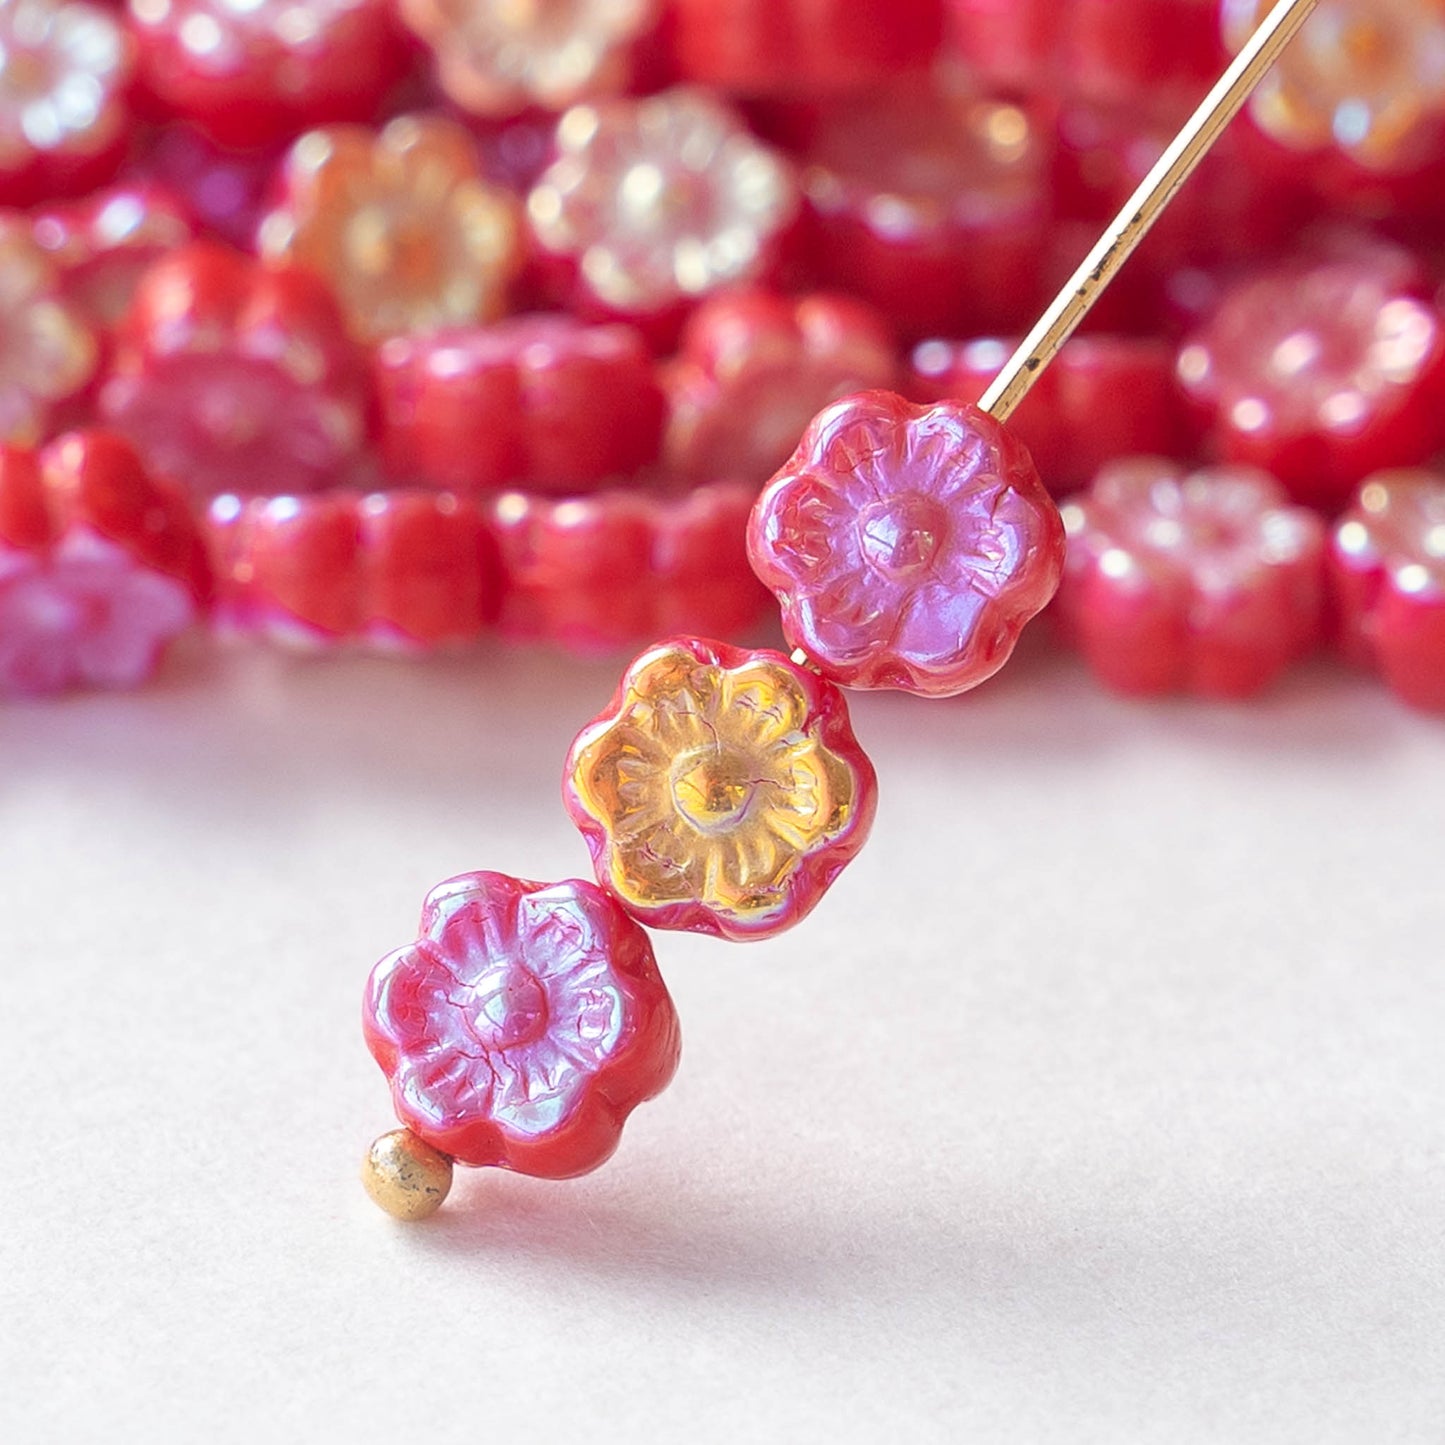 Load image into Gallery viewer, 6mm Flower Beads - Opaque Red Luster AB - 20
